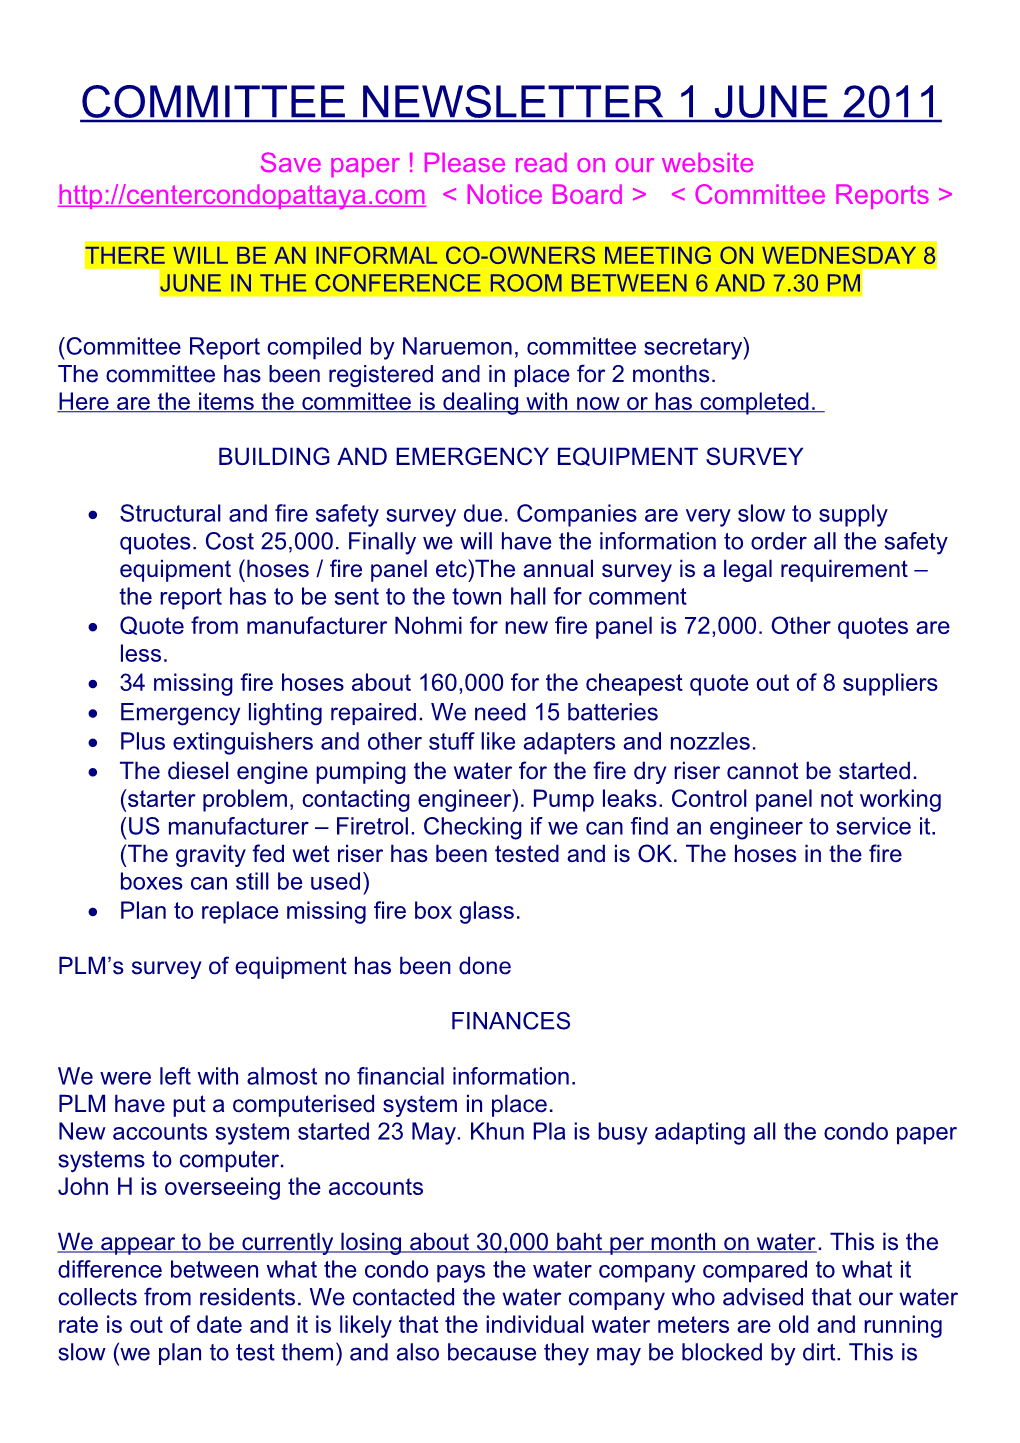 Save Paper ! Please Read on Our Website